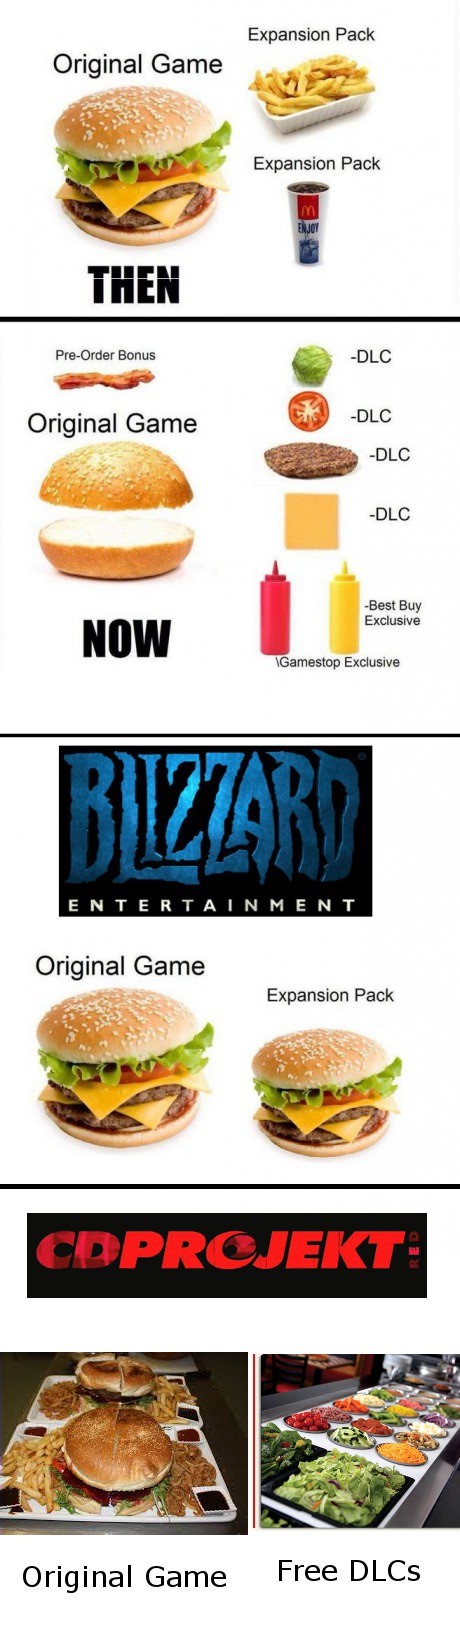 games_and_expansion_packs.jpg